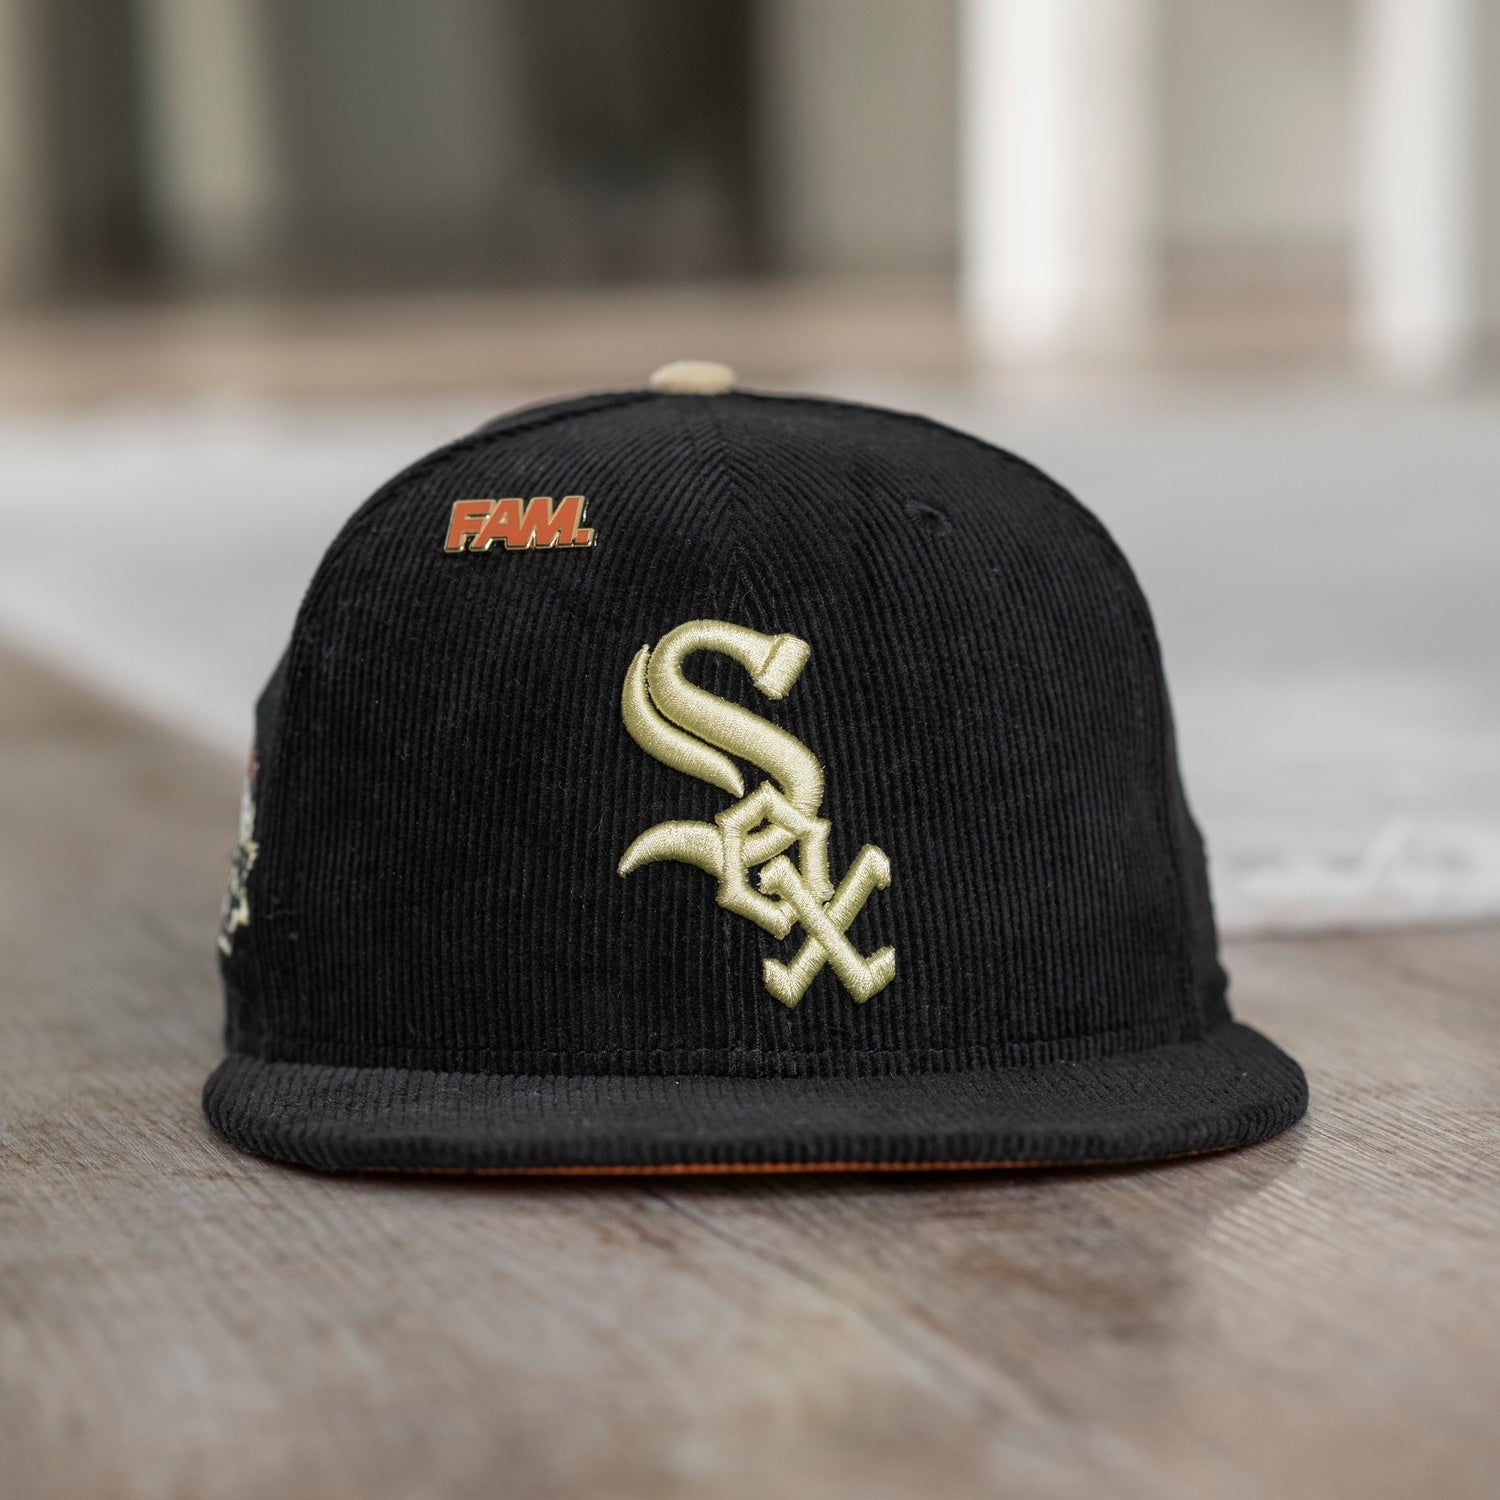 NEW ERA 59FIFTY MLB CHICAGO WHITE SOX INAUGURAL YEAR 1991 CORD BLACK / FIGHT ORANGE UV FITTED CAP